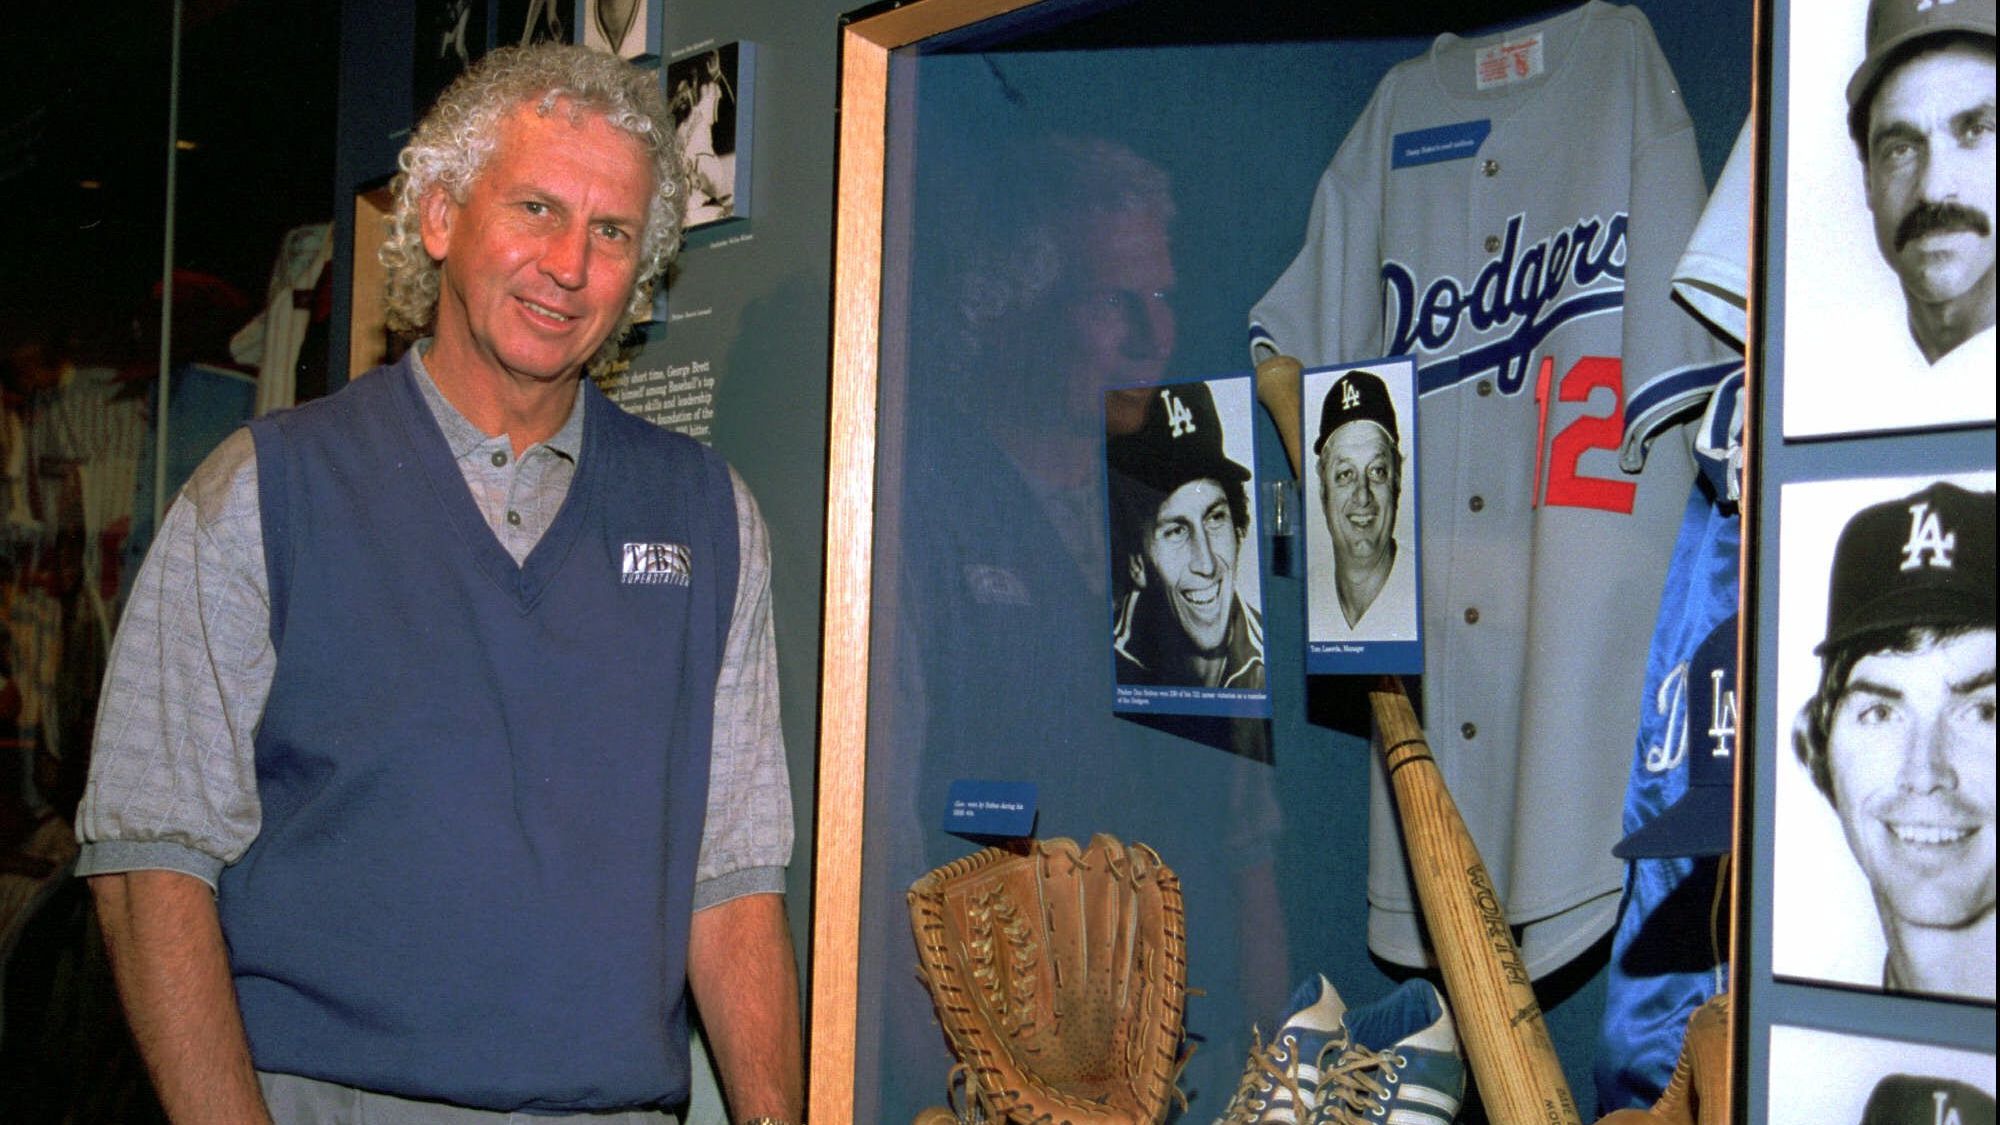 Remembering Don Sutton. The Hall of Famer and all-time Dodger